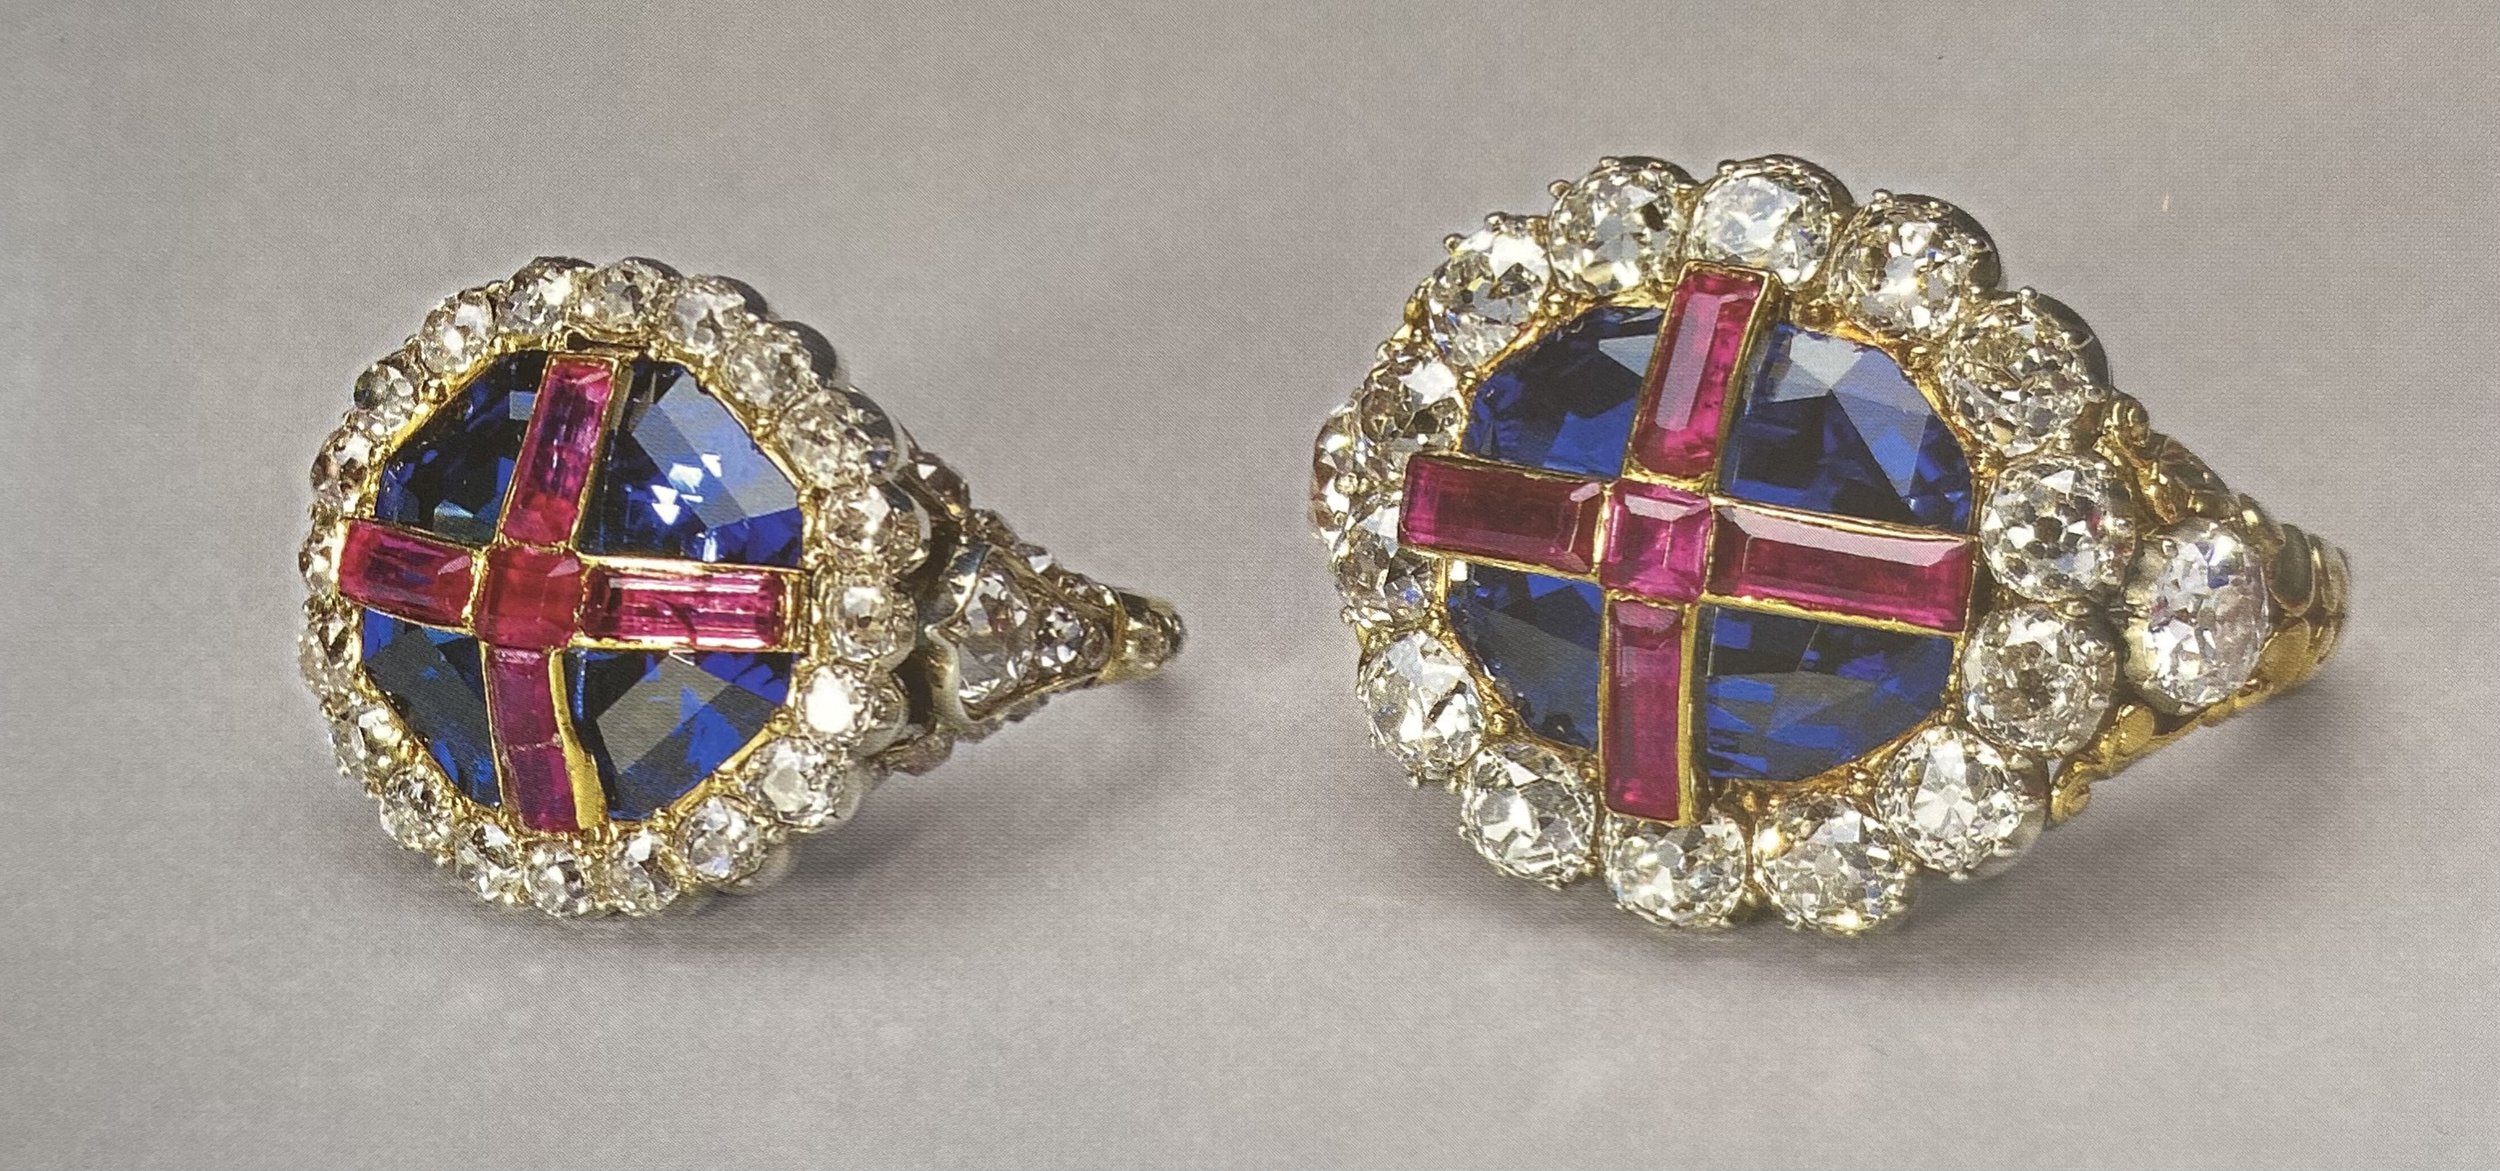 Queen Victoria’s little Coronation Ring on left, with the Coronation Ring of her uncle King William IV on right